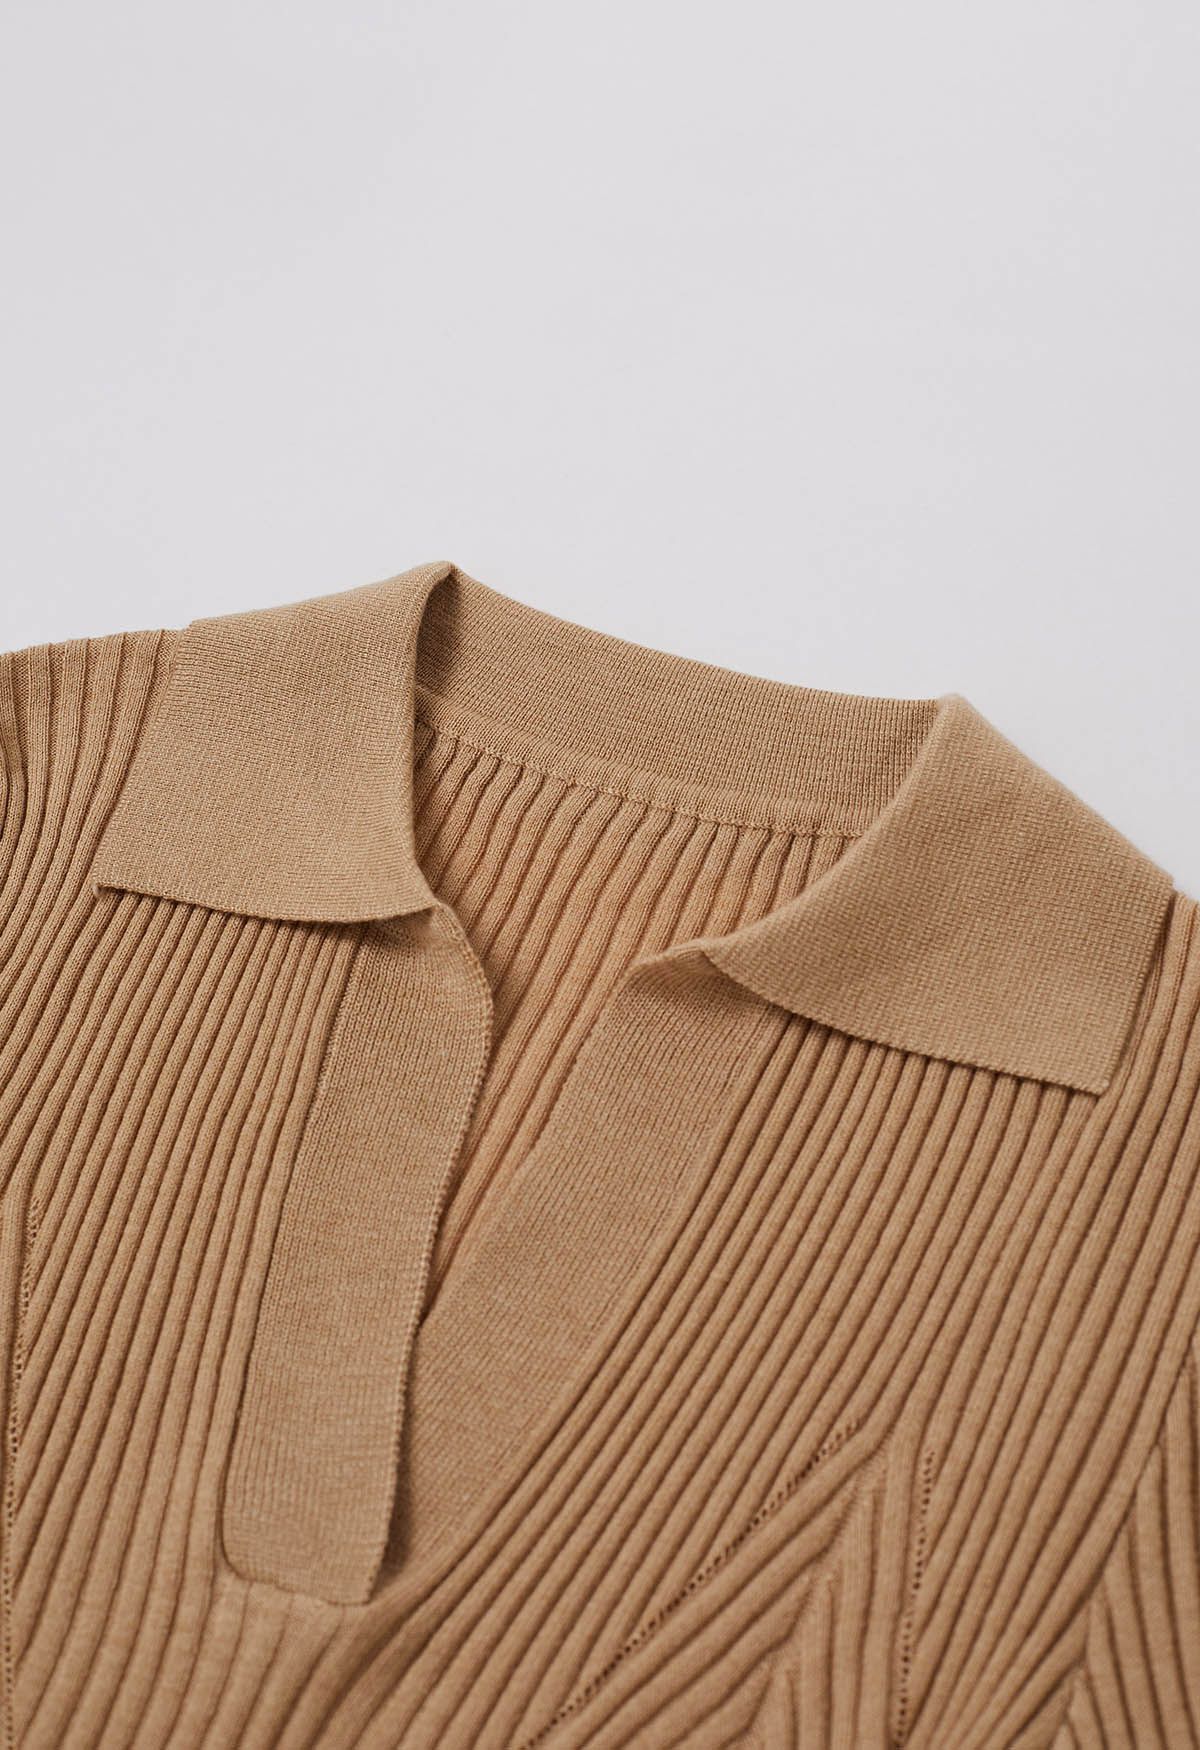 V-Neck Collared Fitted Knit Top in Light Tan